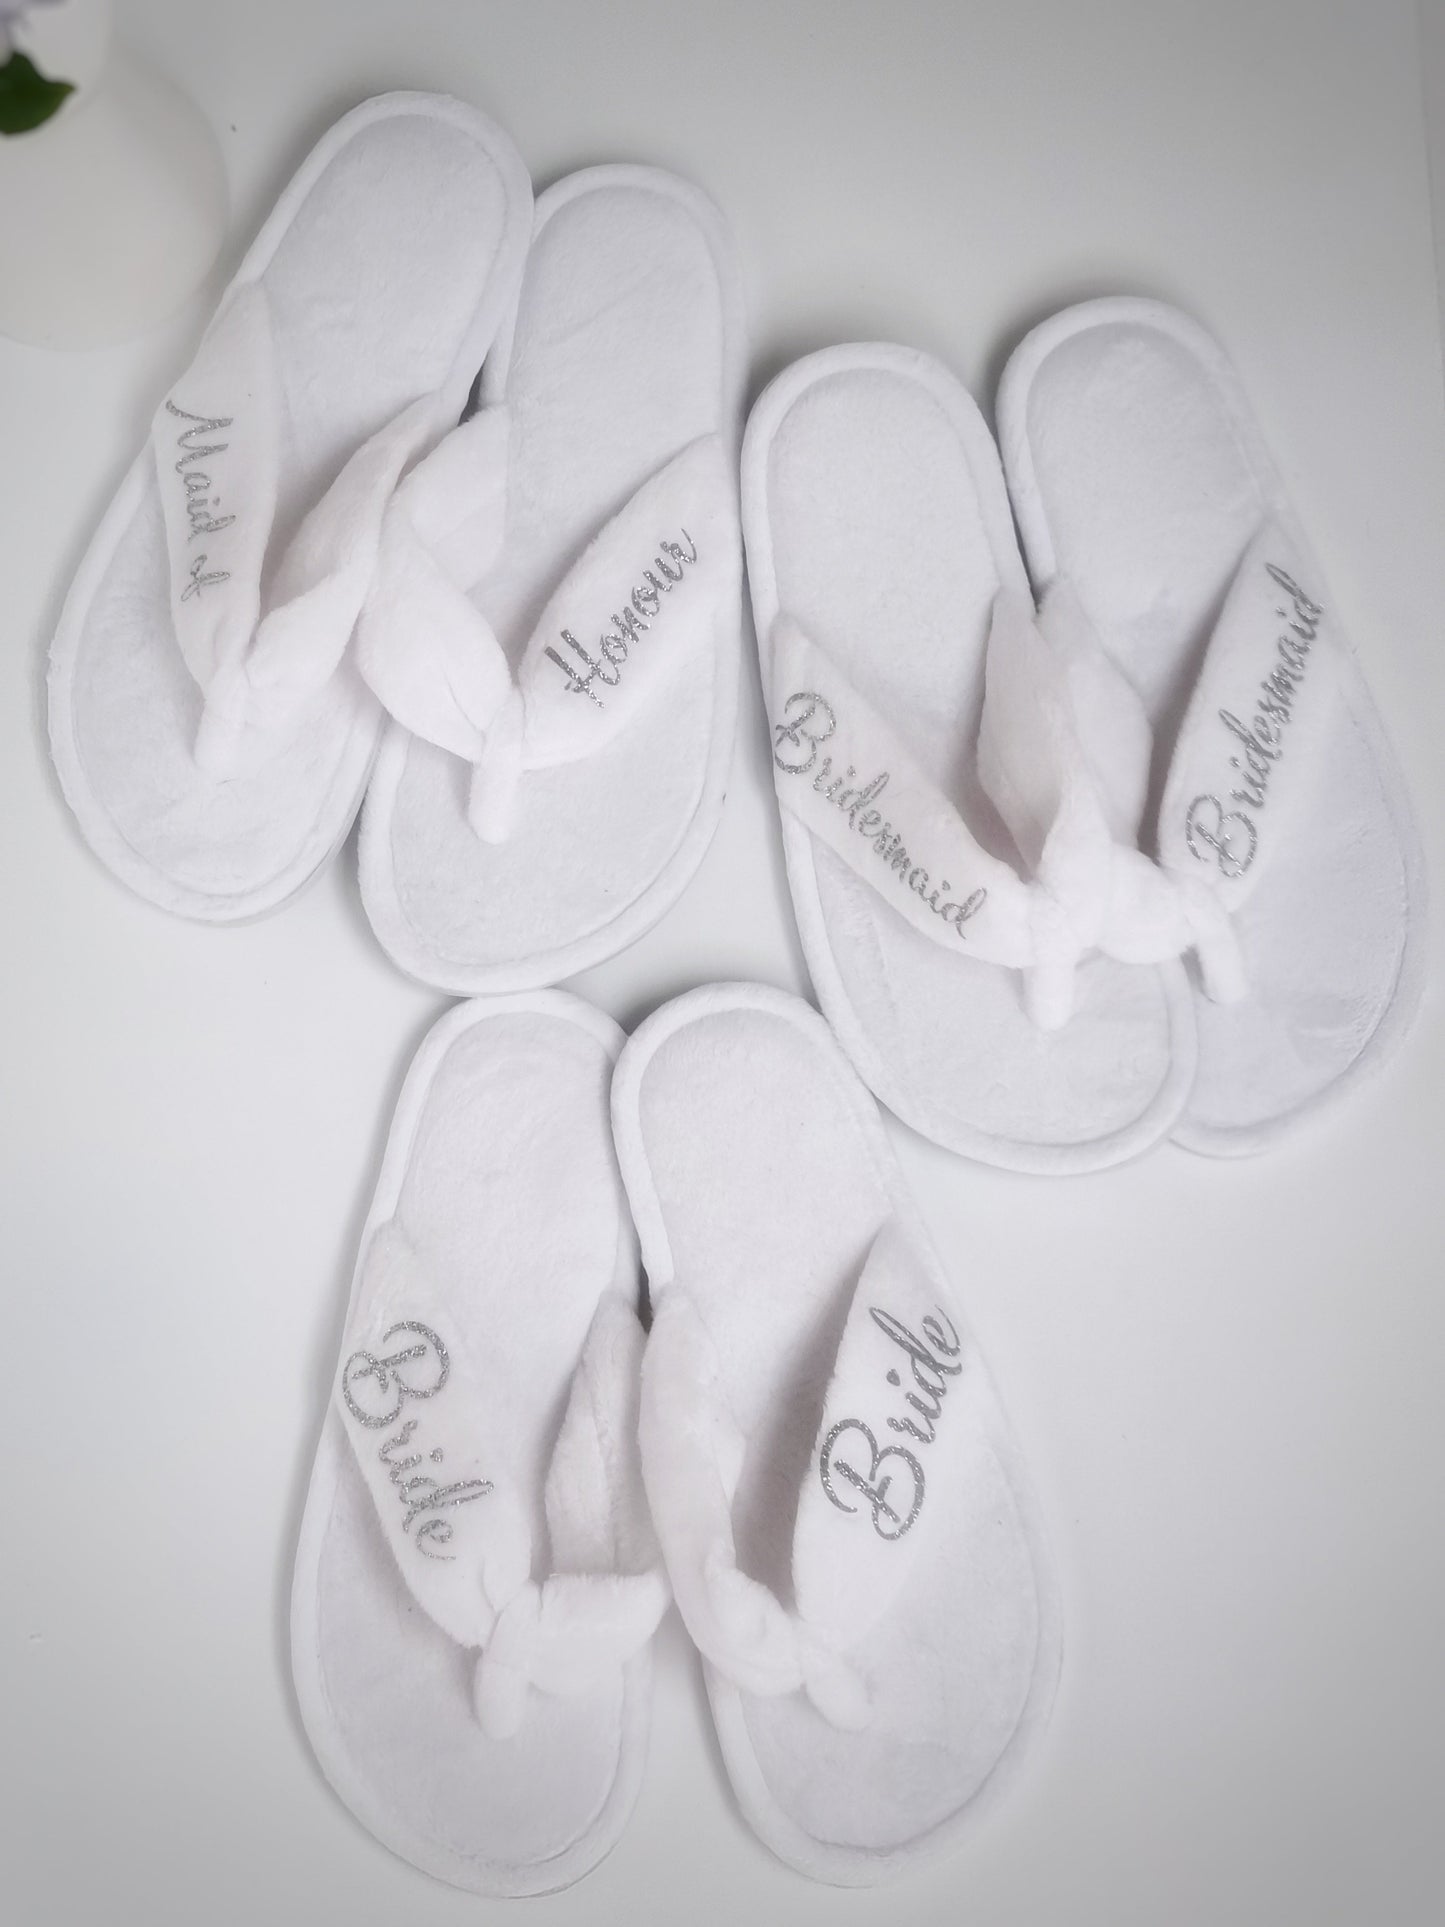 Bridal party thong towelling slippers - Smooches Bridal